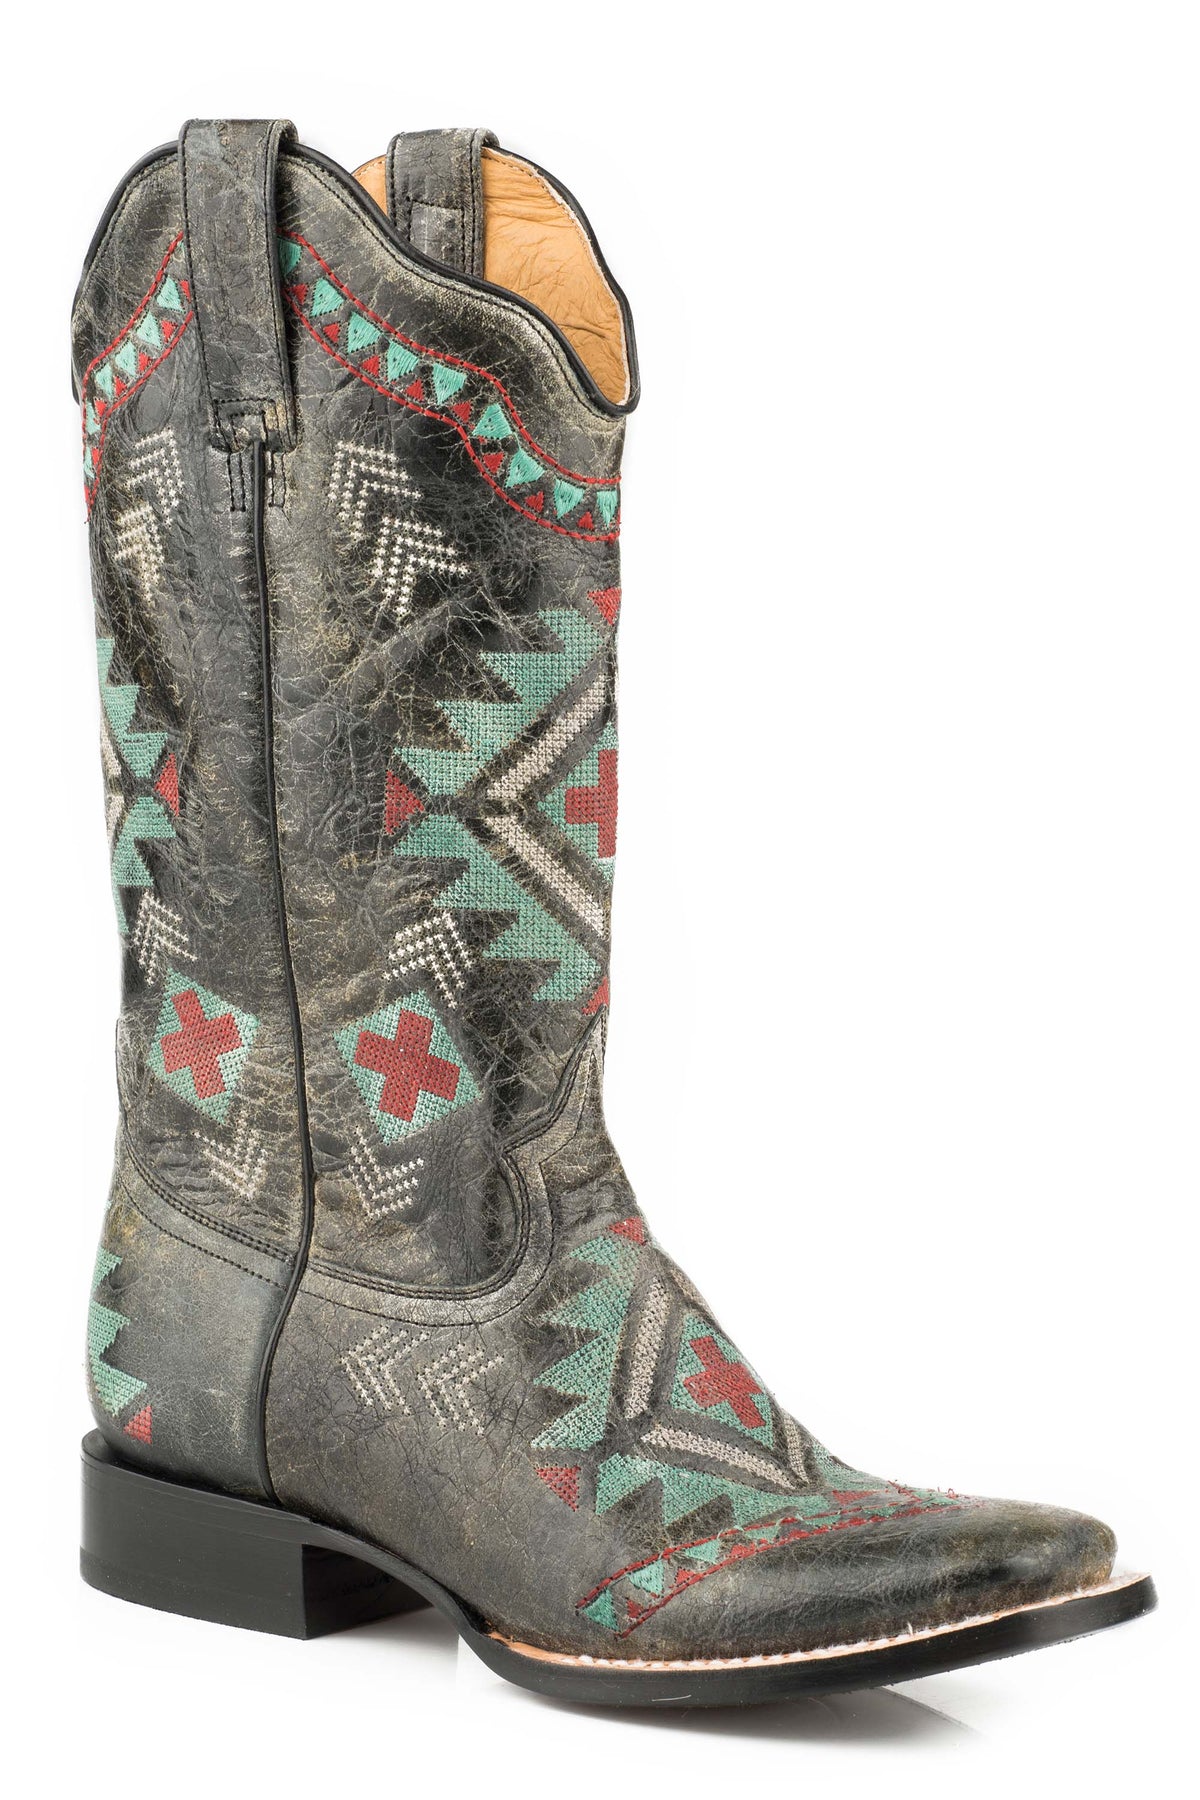 Roper Womens Leather Cowboy Boot Waxy Black With Southwest Embroidered Design